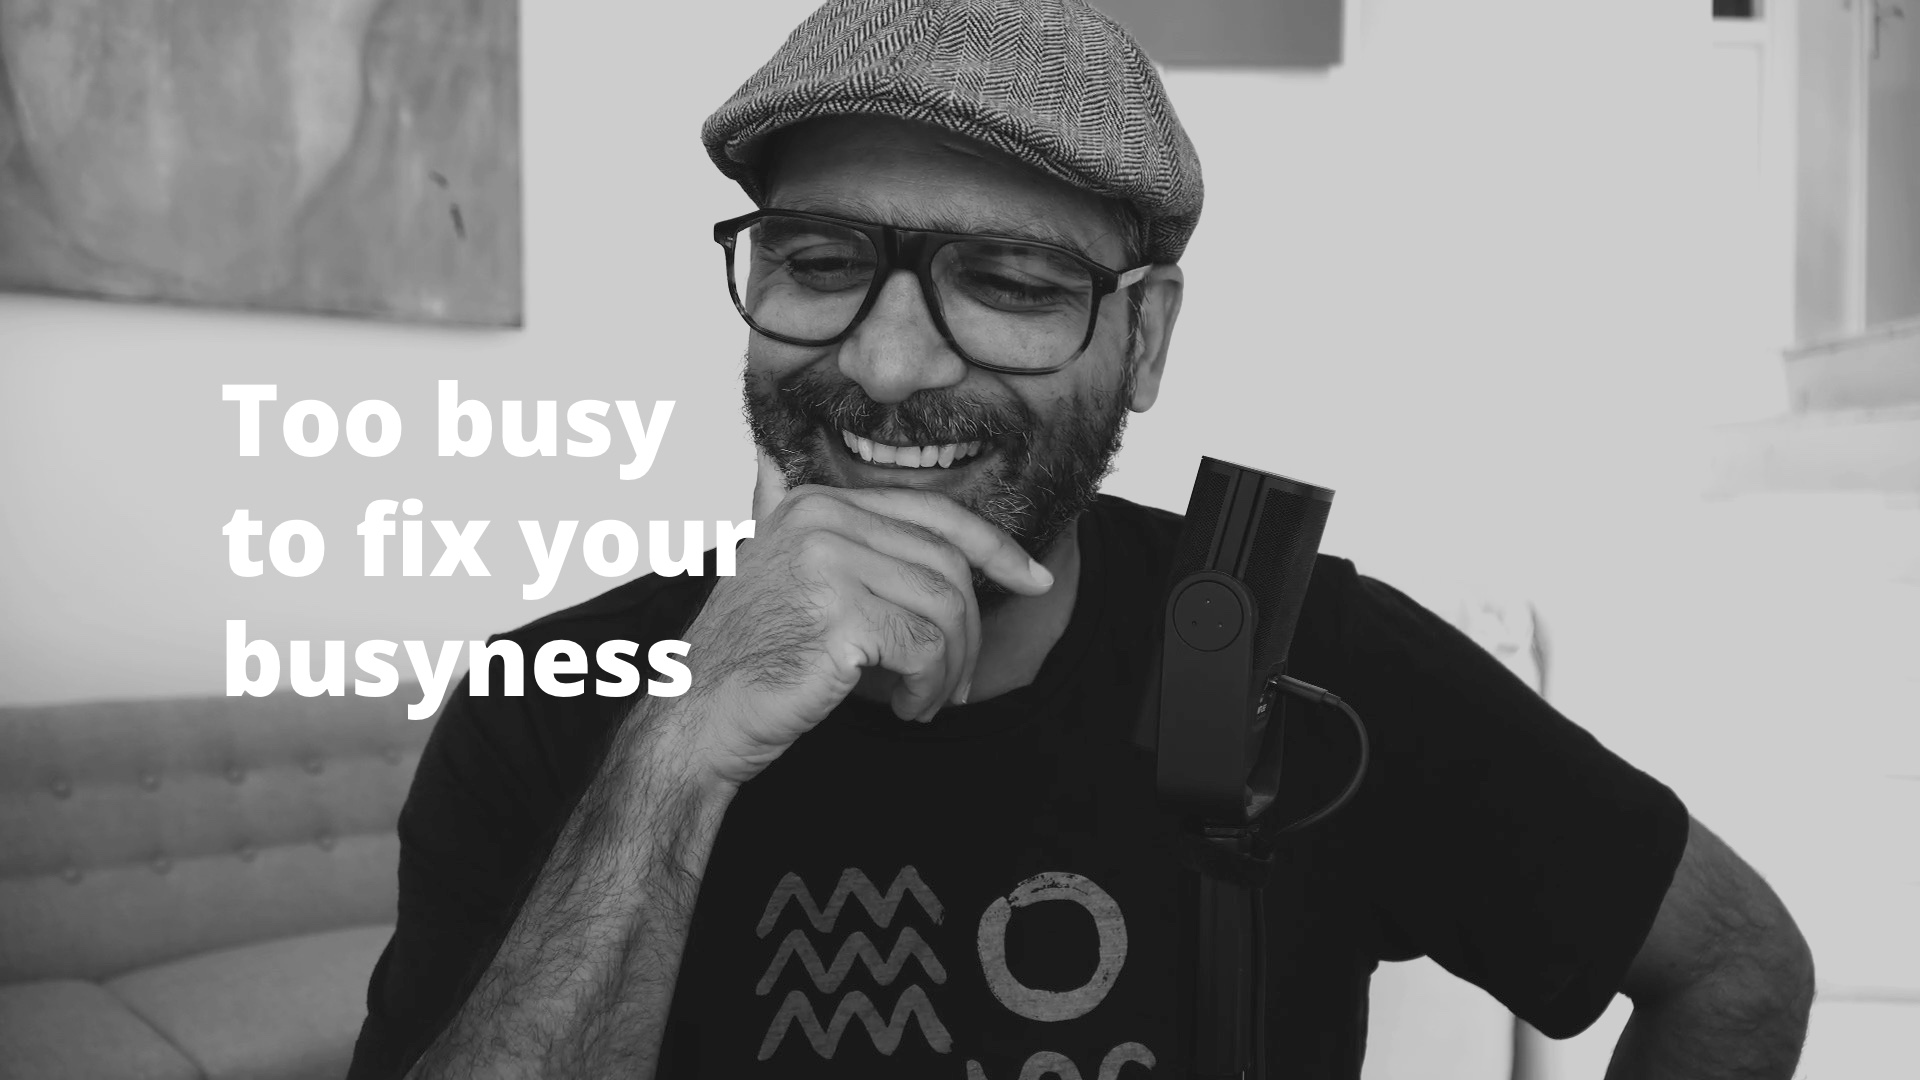 Too busy to fix your busyness